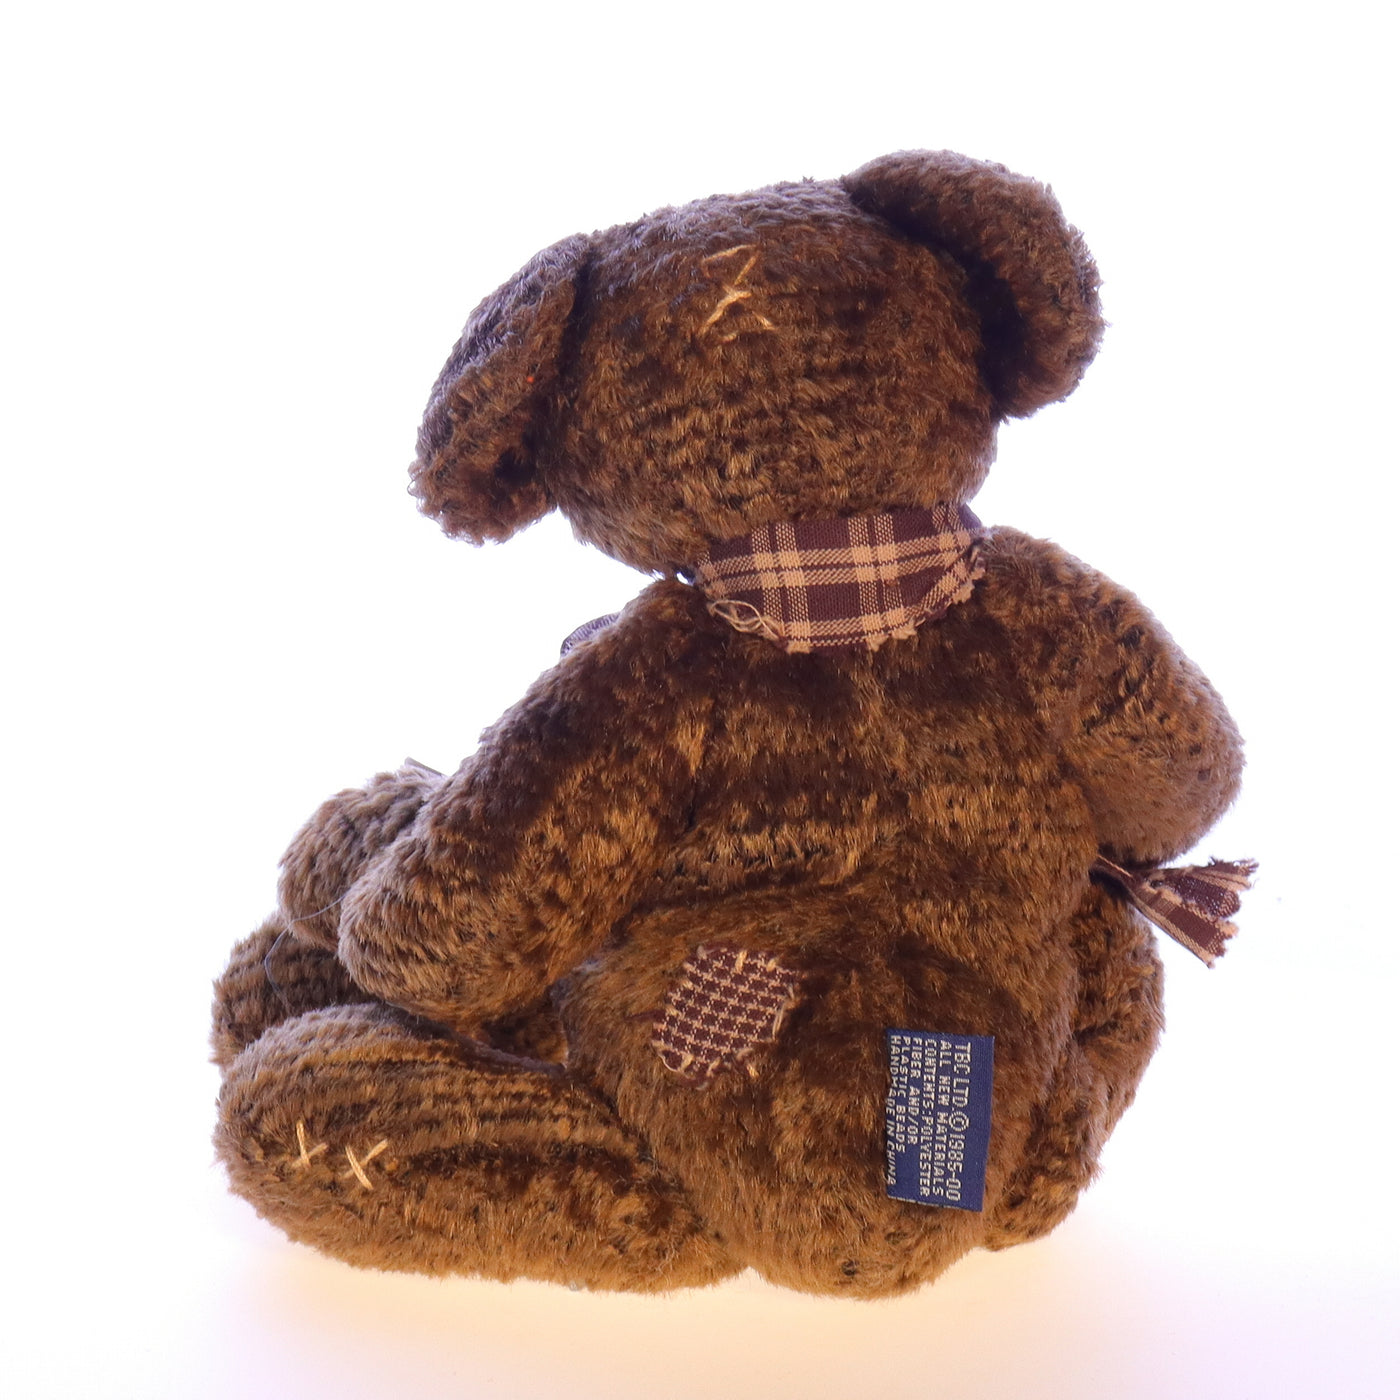 Boyds_Bears_and_Friends_51000-05_Scruffy_S_Beariluved_JB_Bean_and_Associates_Stuffed_Animal_1985 Back View